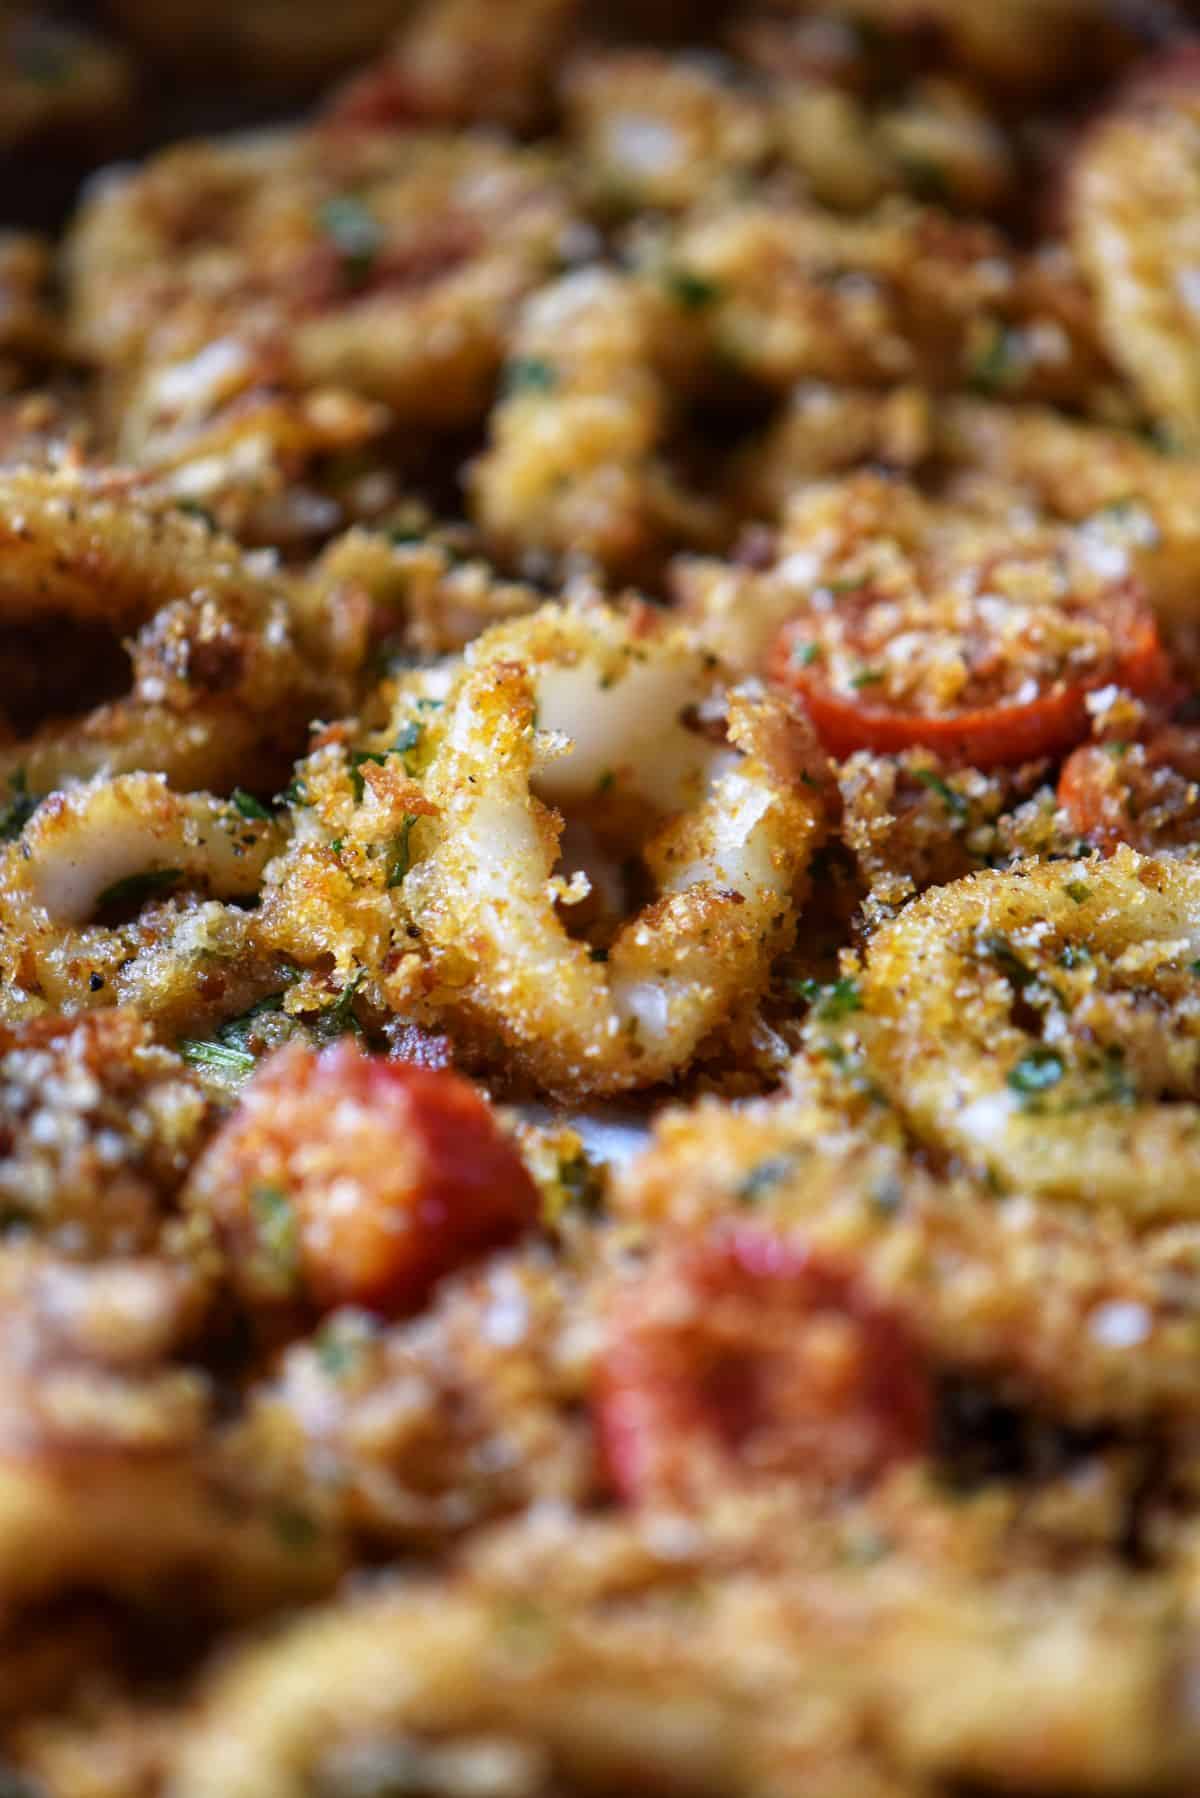 Baked calamari with homemade breadcrumbs and cherry tomatoes.